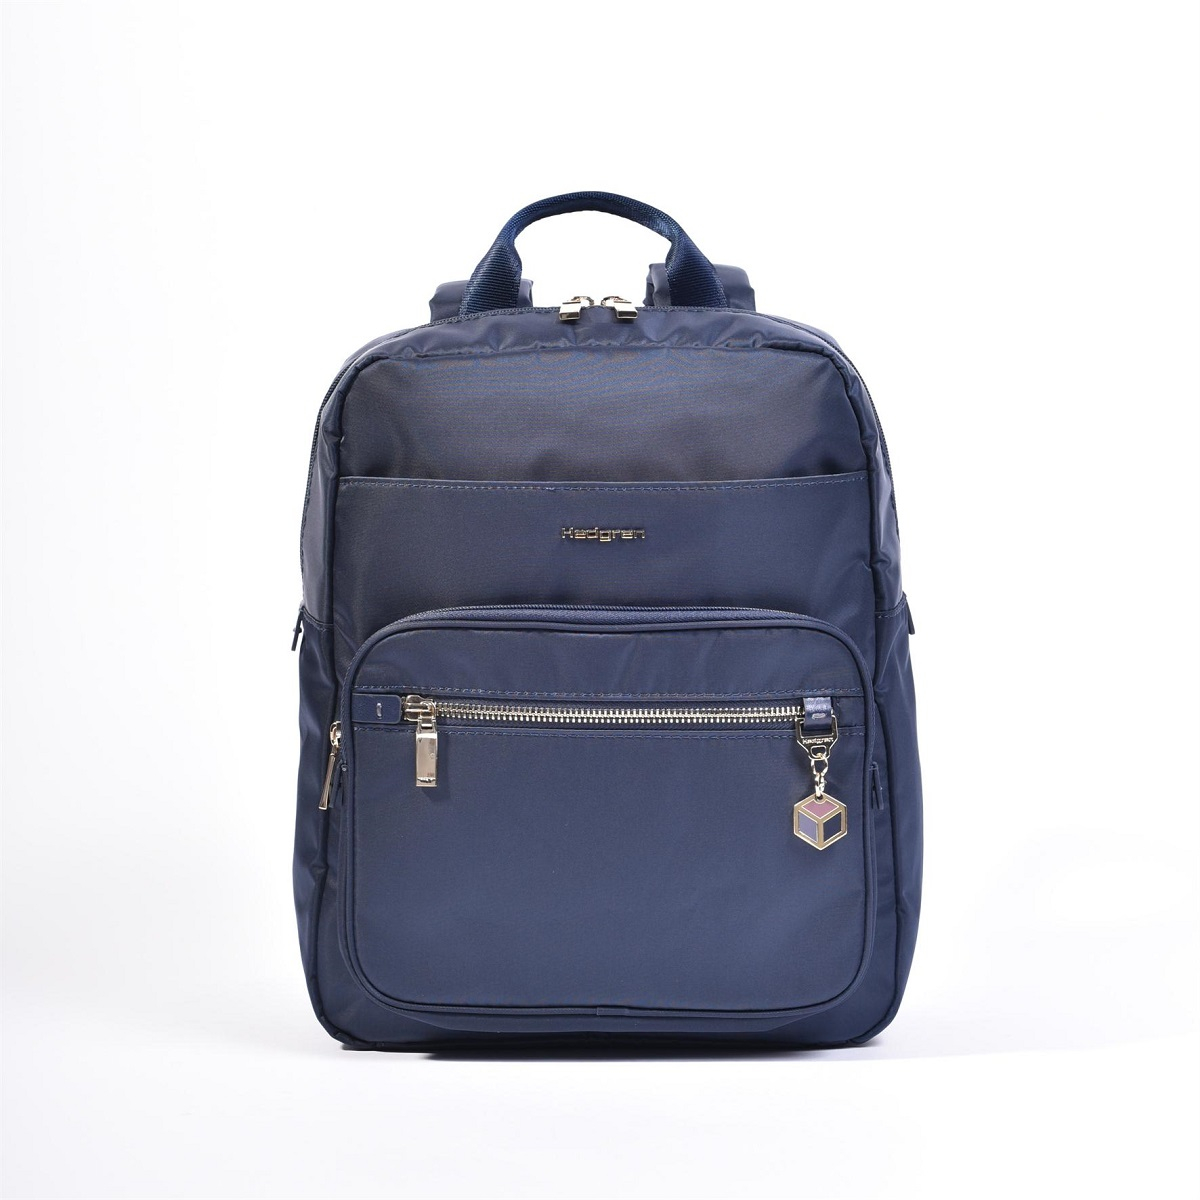 Image of Spell Backpack in Mood Indigo